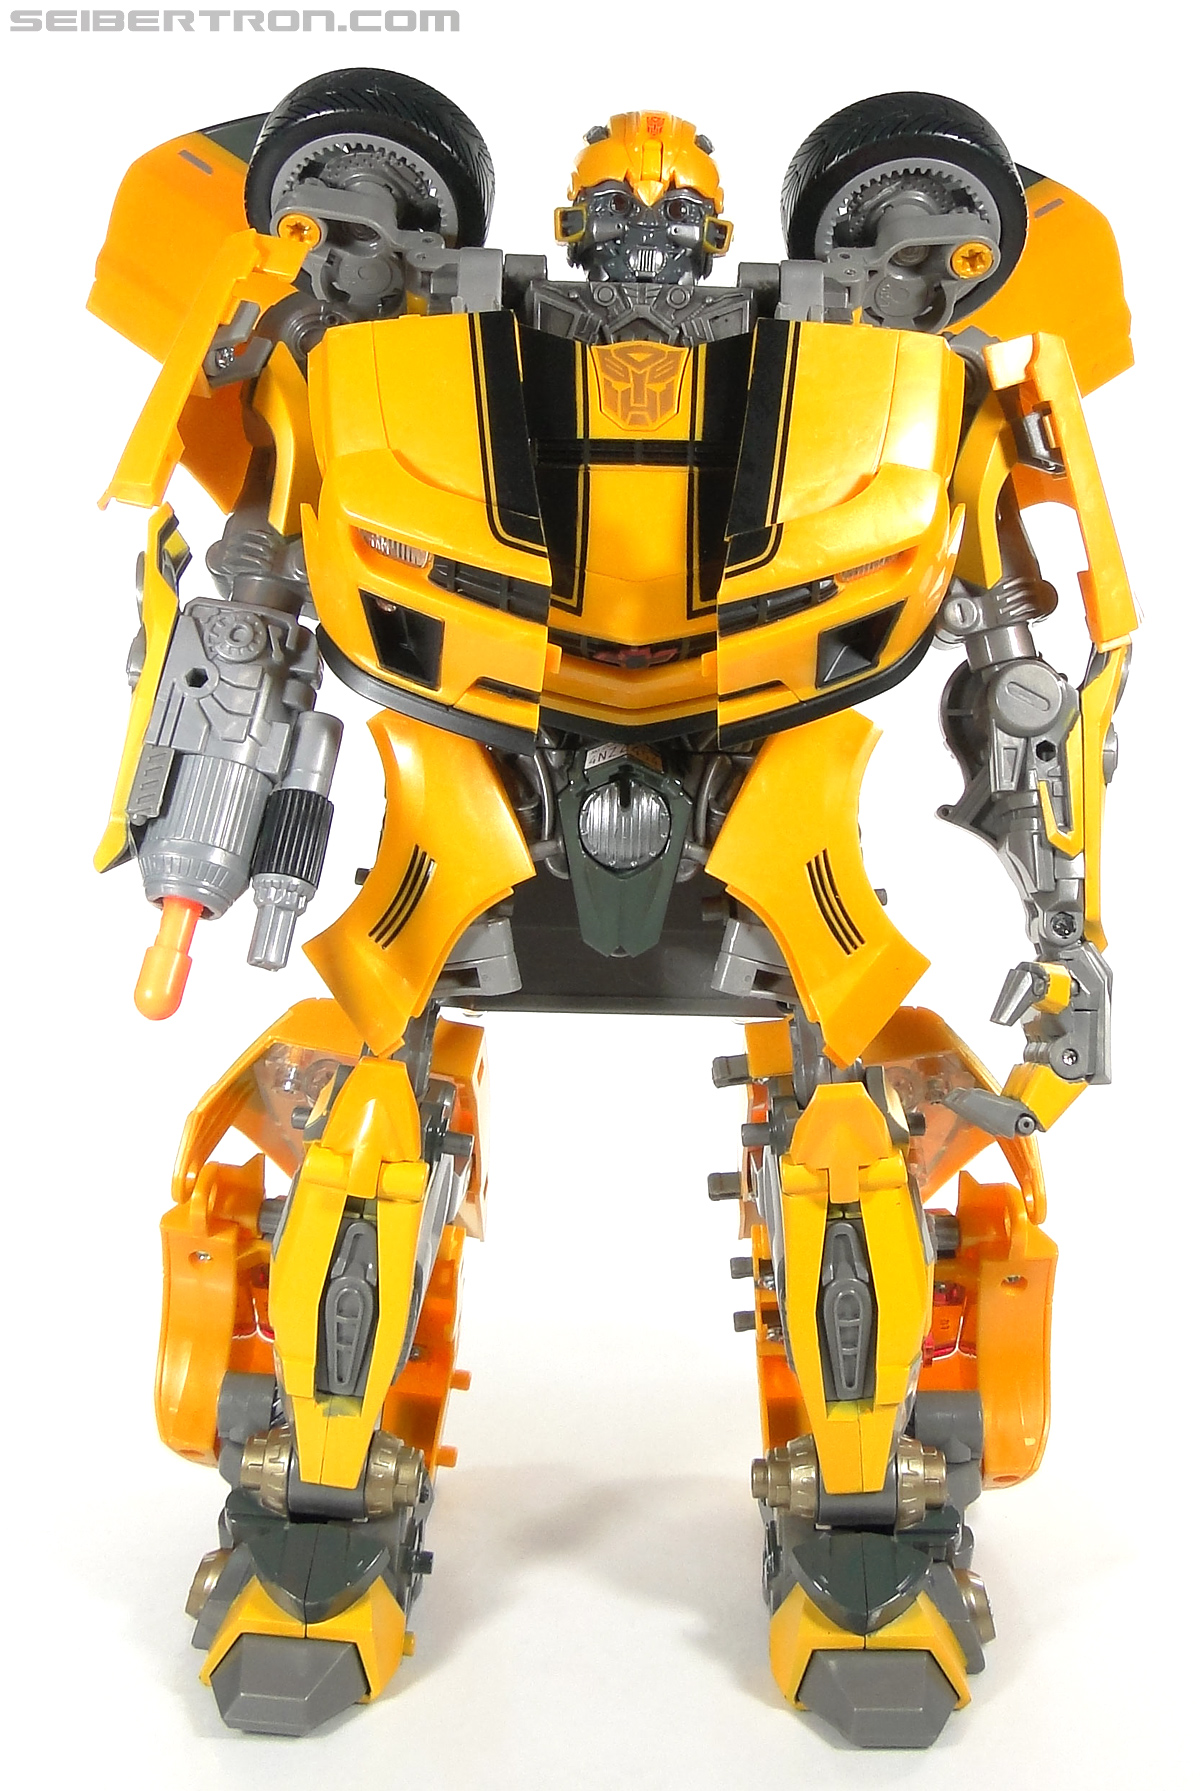 https://static.seibertron.com/images/toys/files/65/ultimate-bumblebee-061.jpg